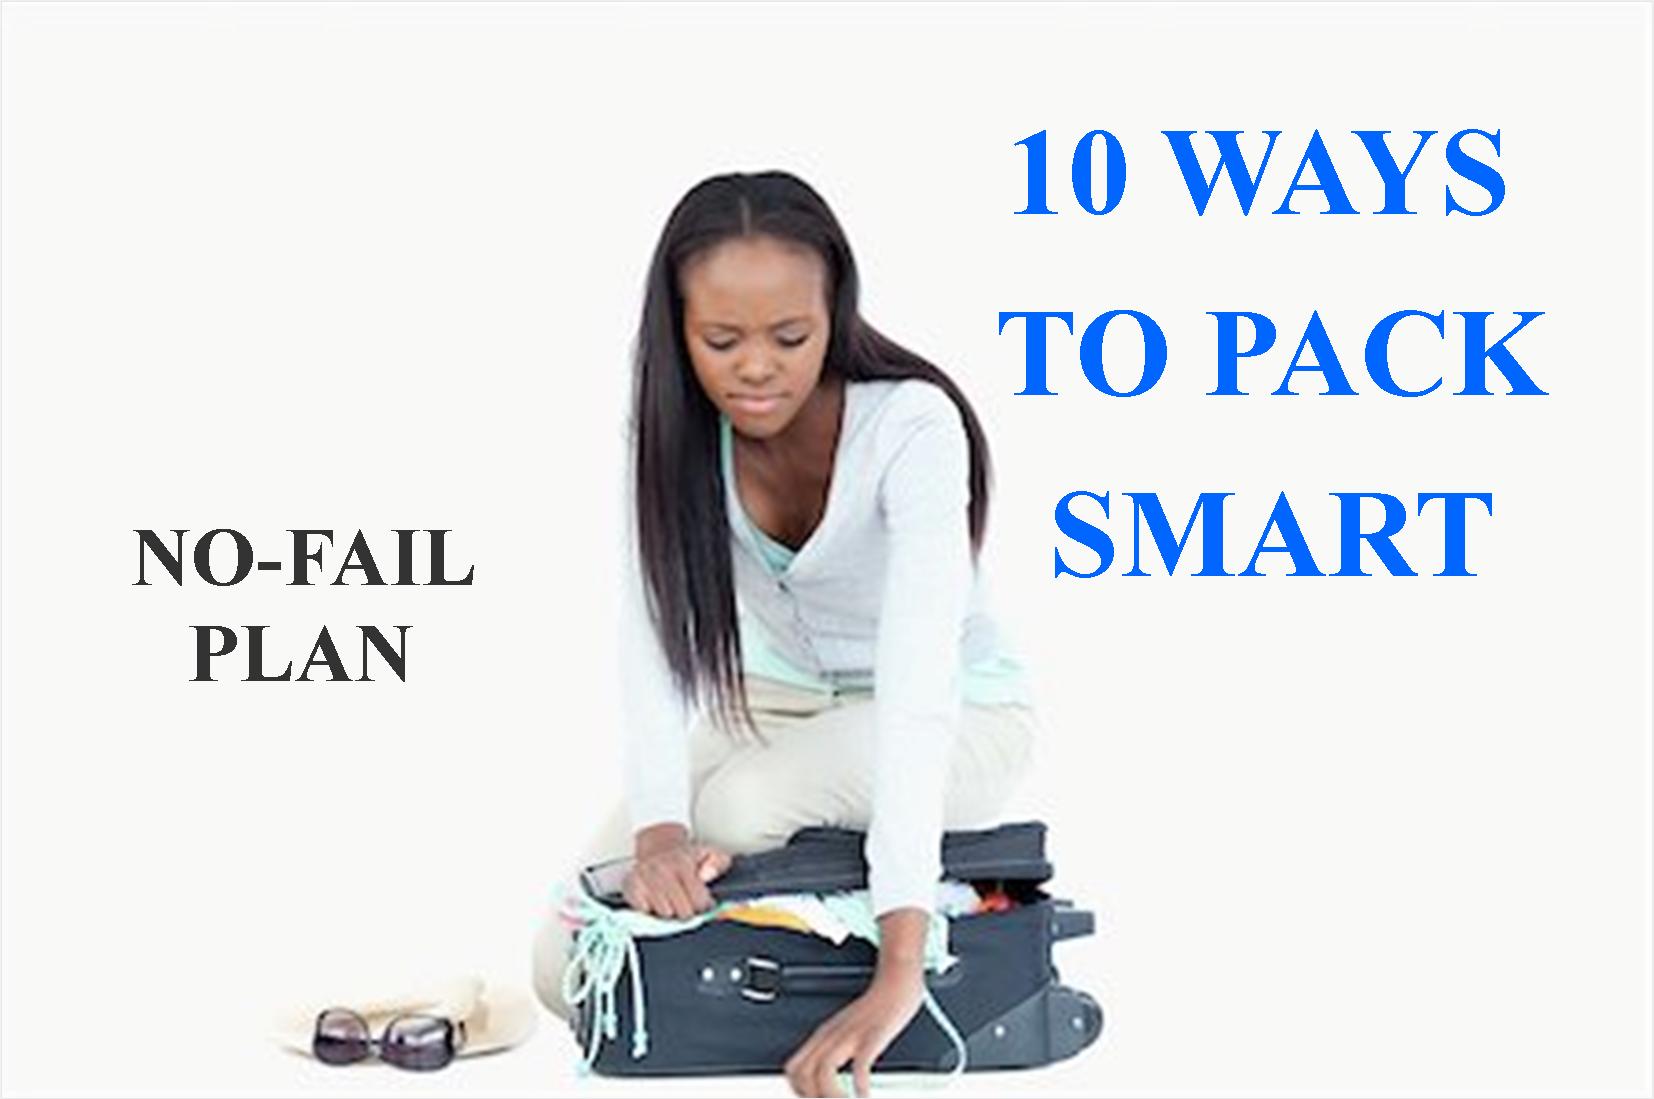 If you need some tips on packing your suitcase, taking advantage of every inch of space, and keeping it all organized, I have 10 pack smart tips for you!